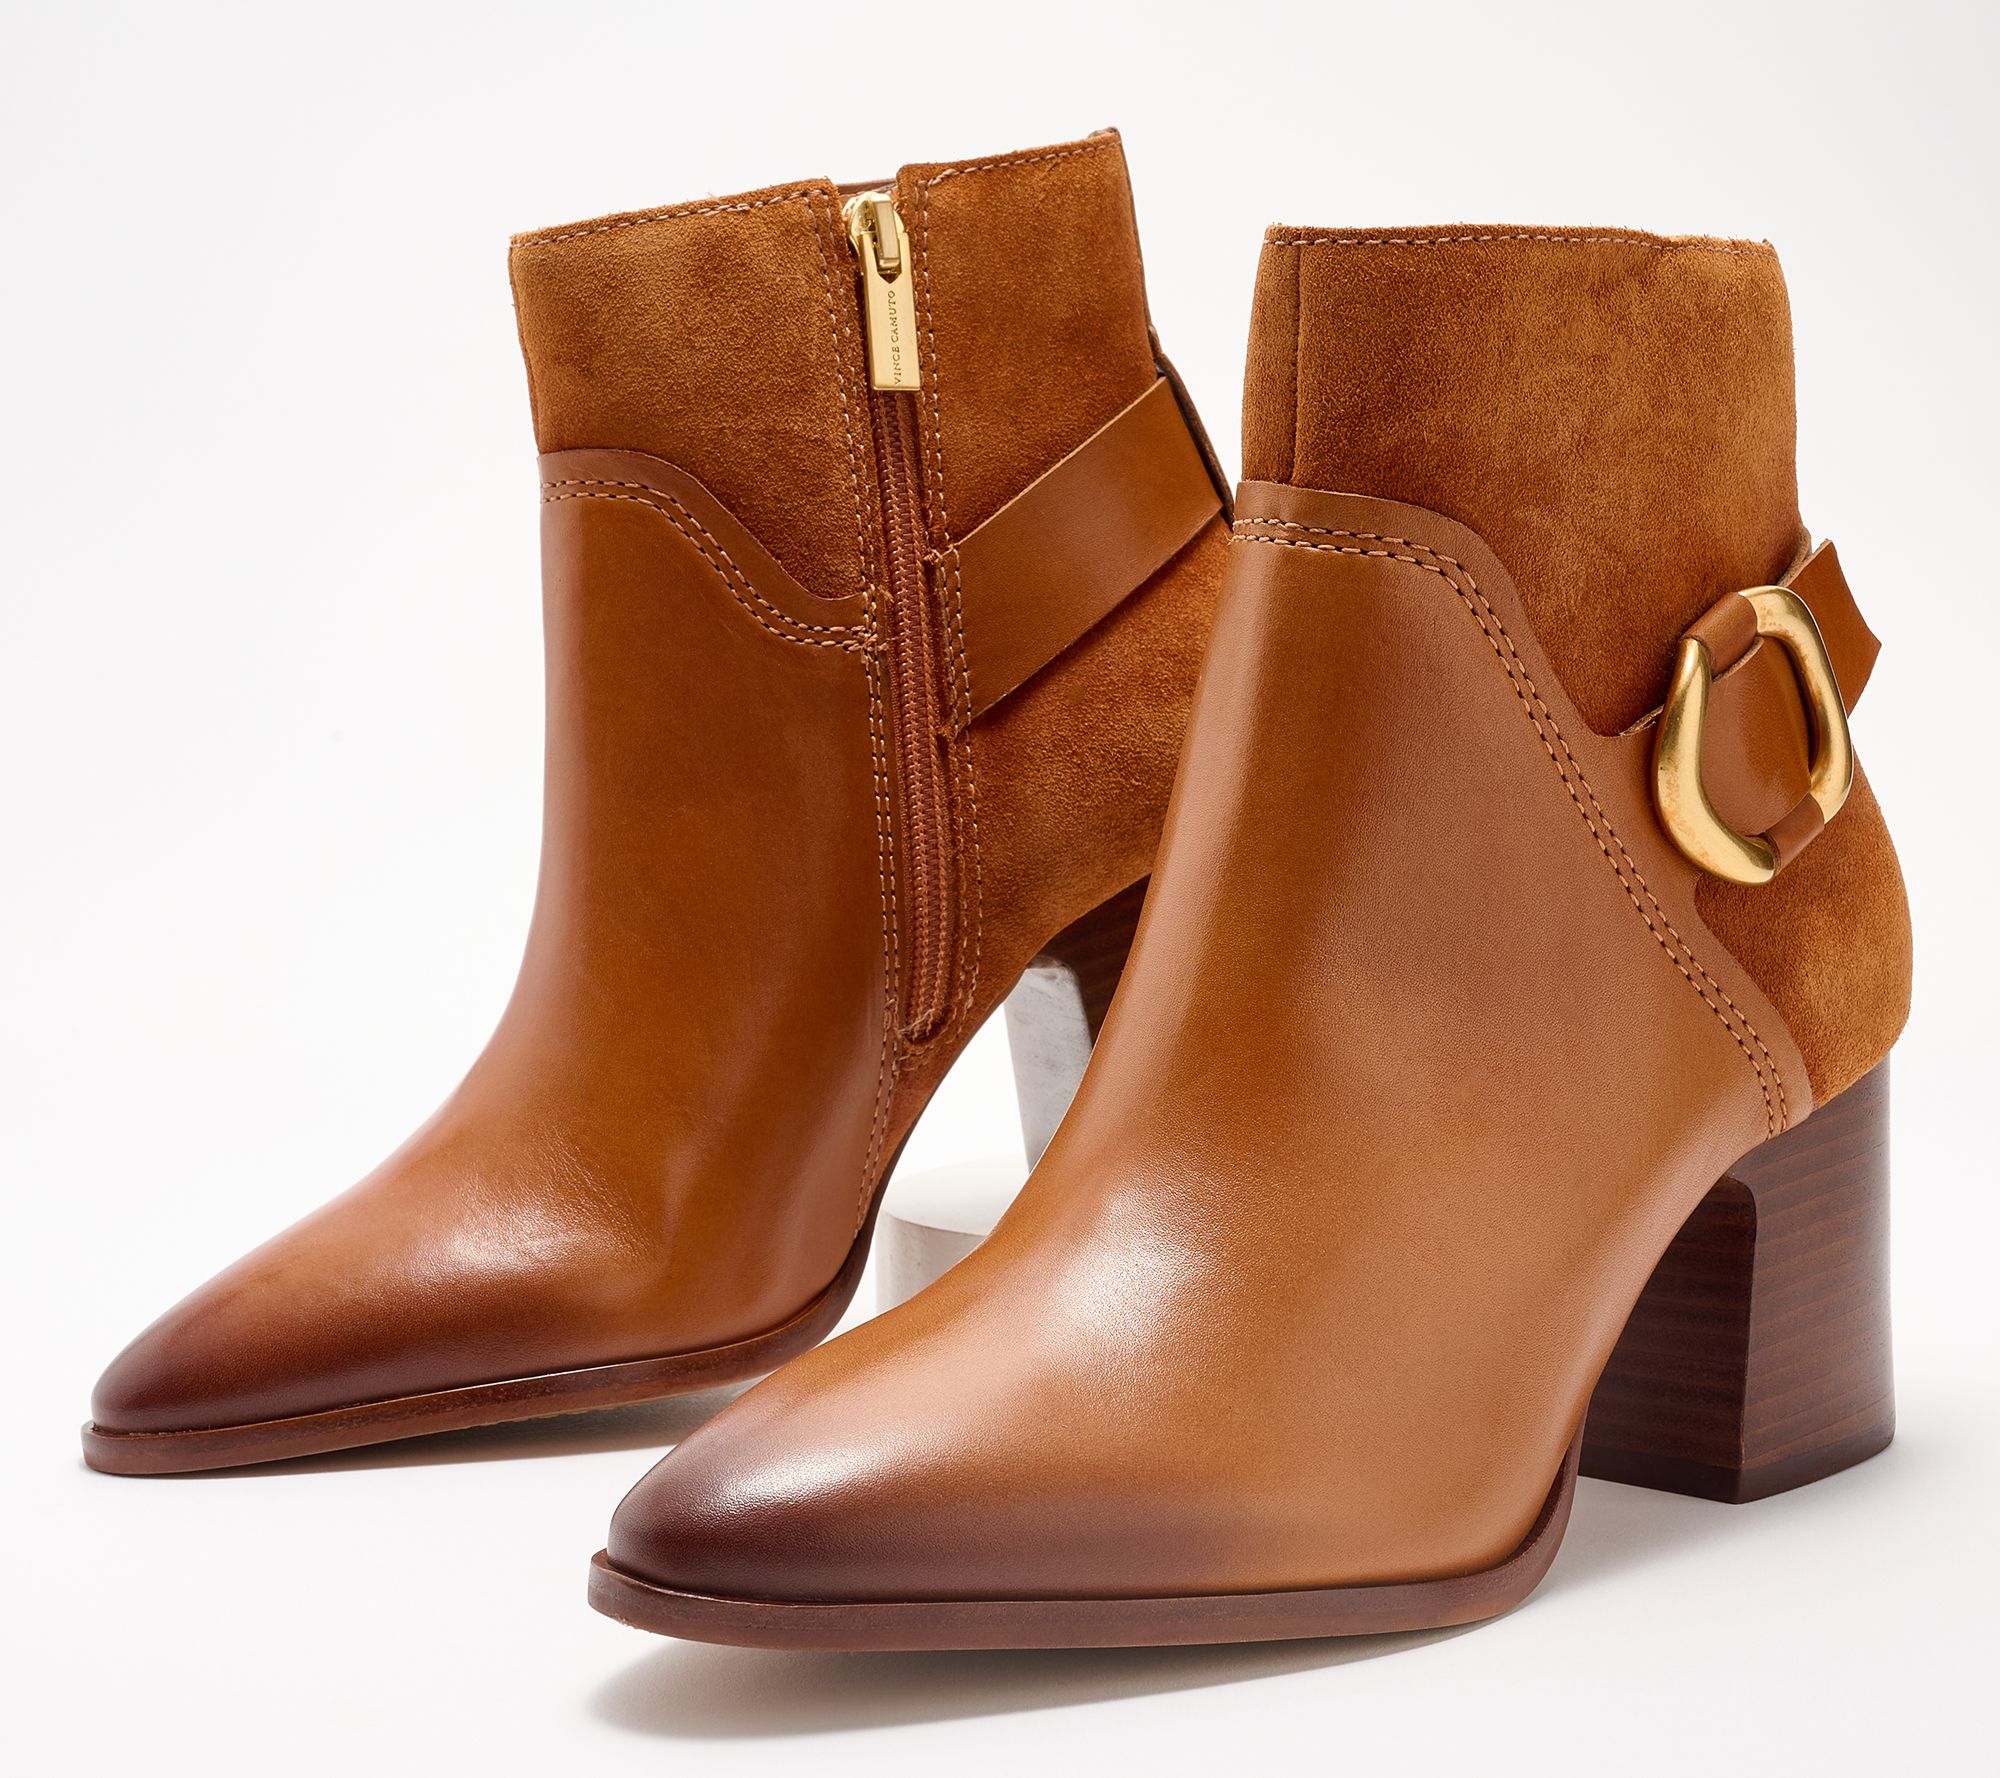 Vince Camuto - Ankle Boots - Shoes 